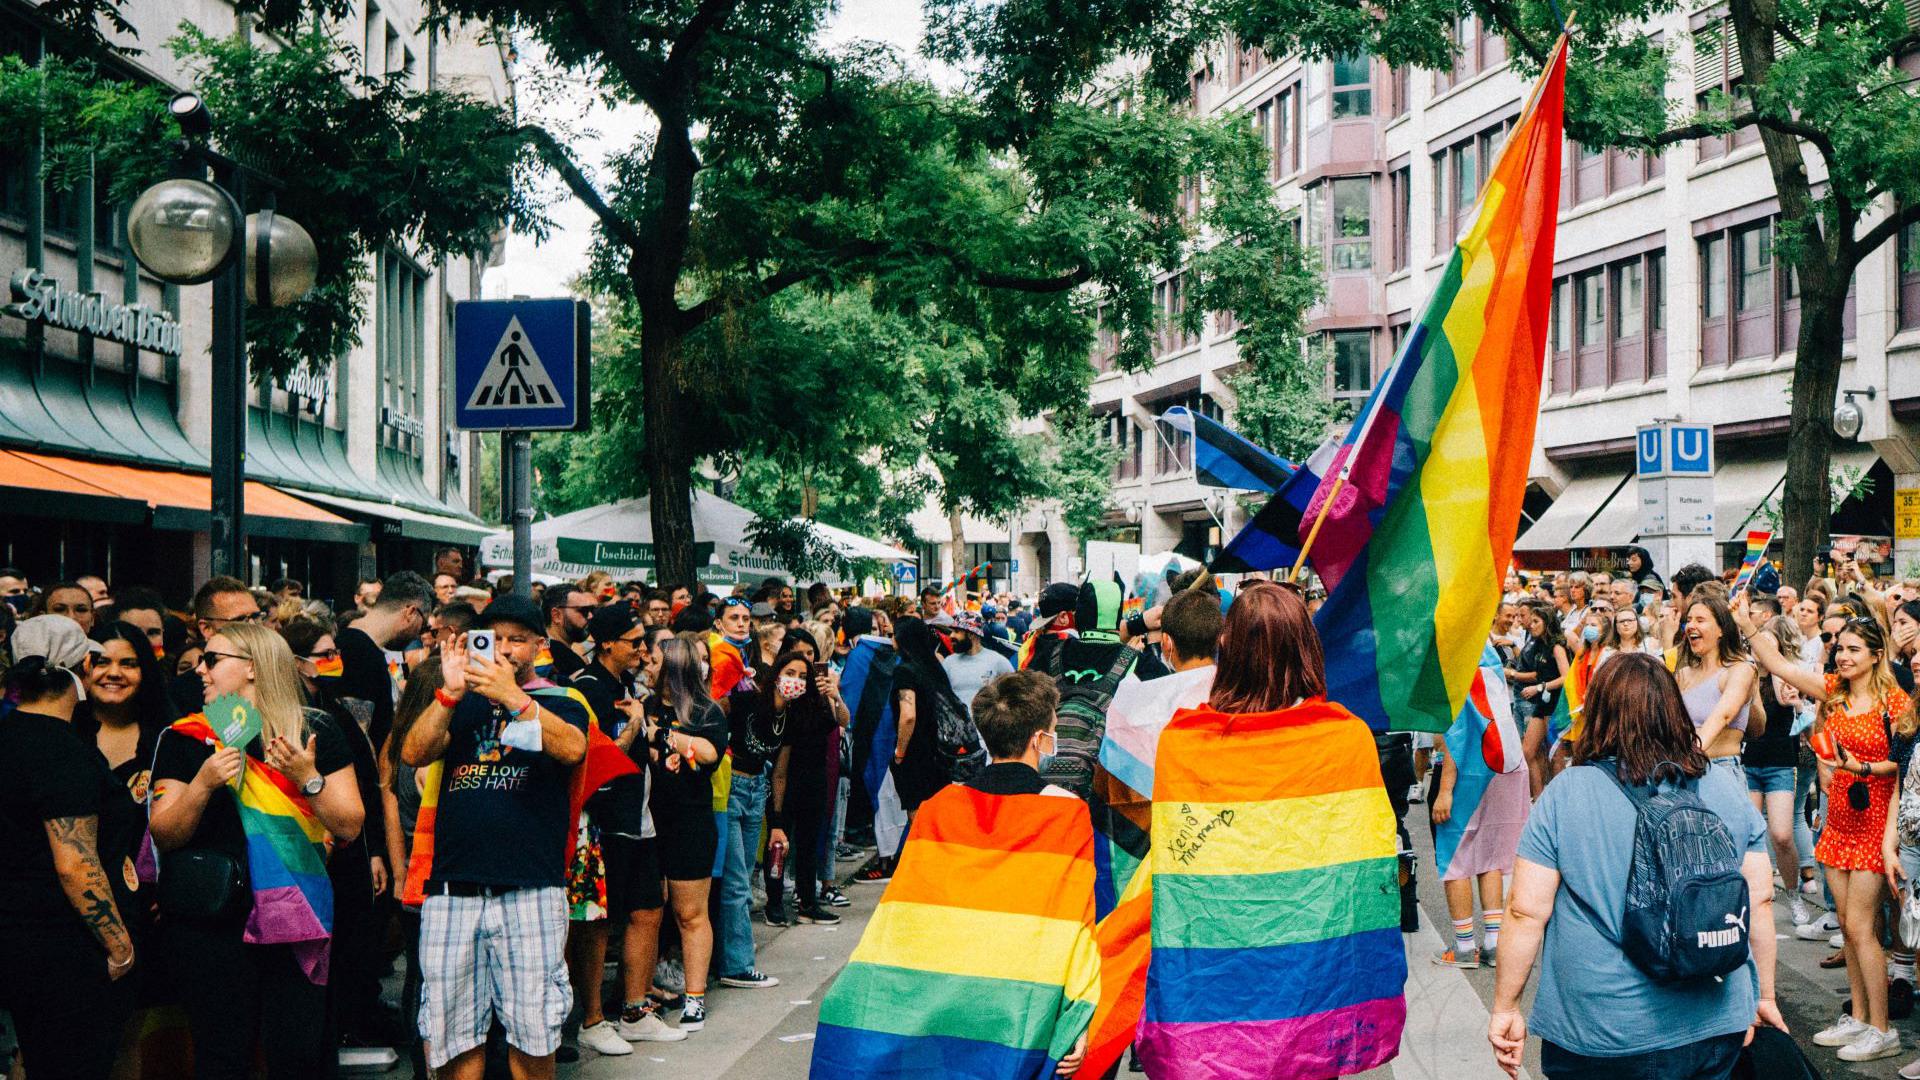 Research-Gay pride parade Germany_Photo by Christian Lue on Unsplash